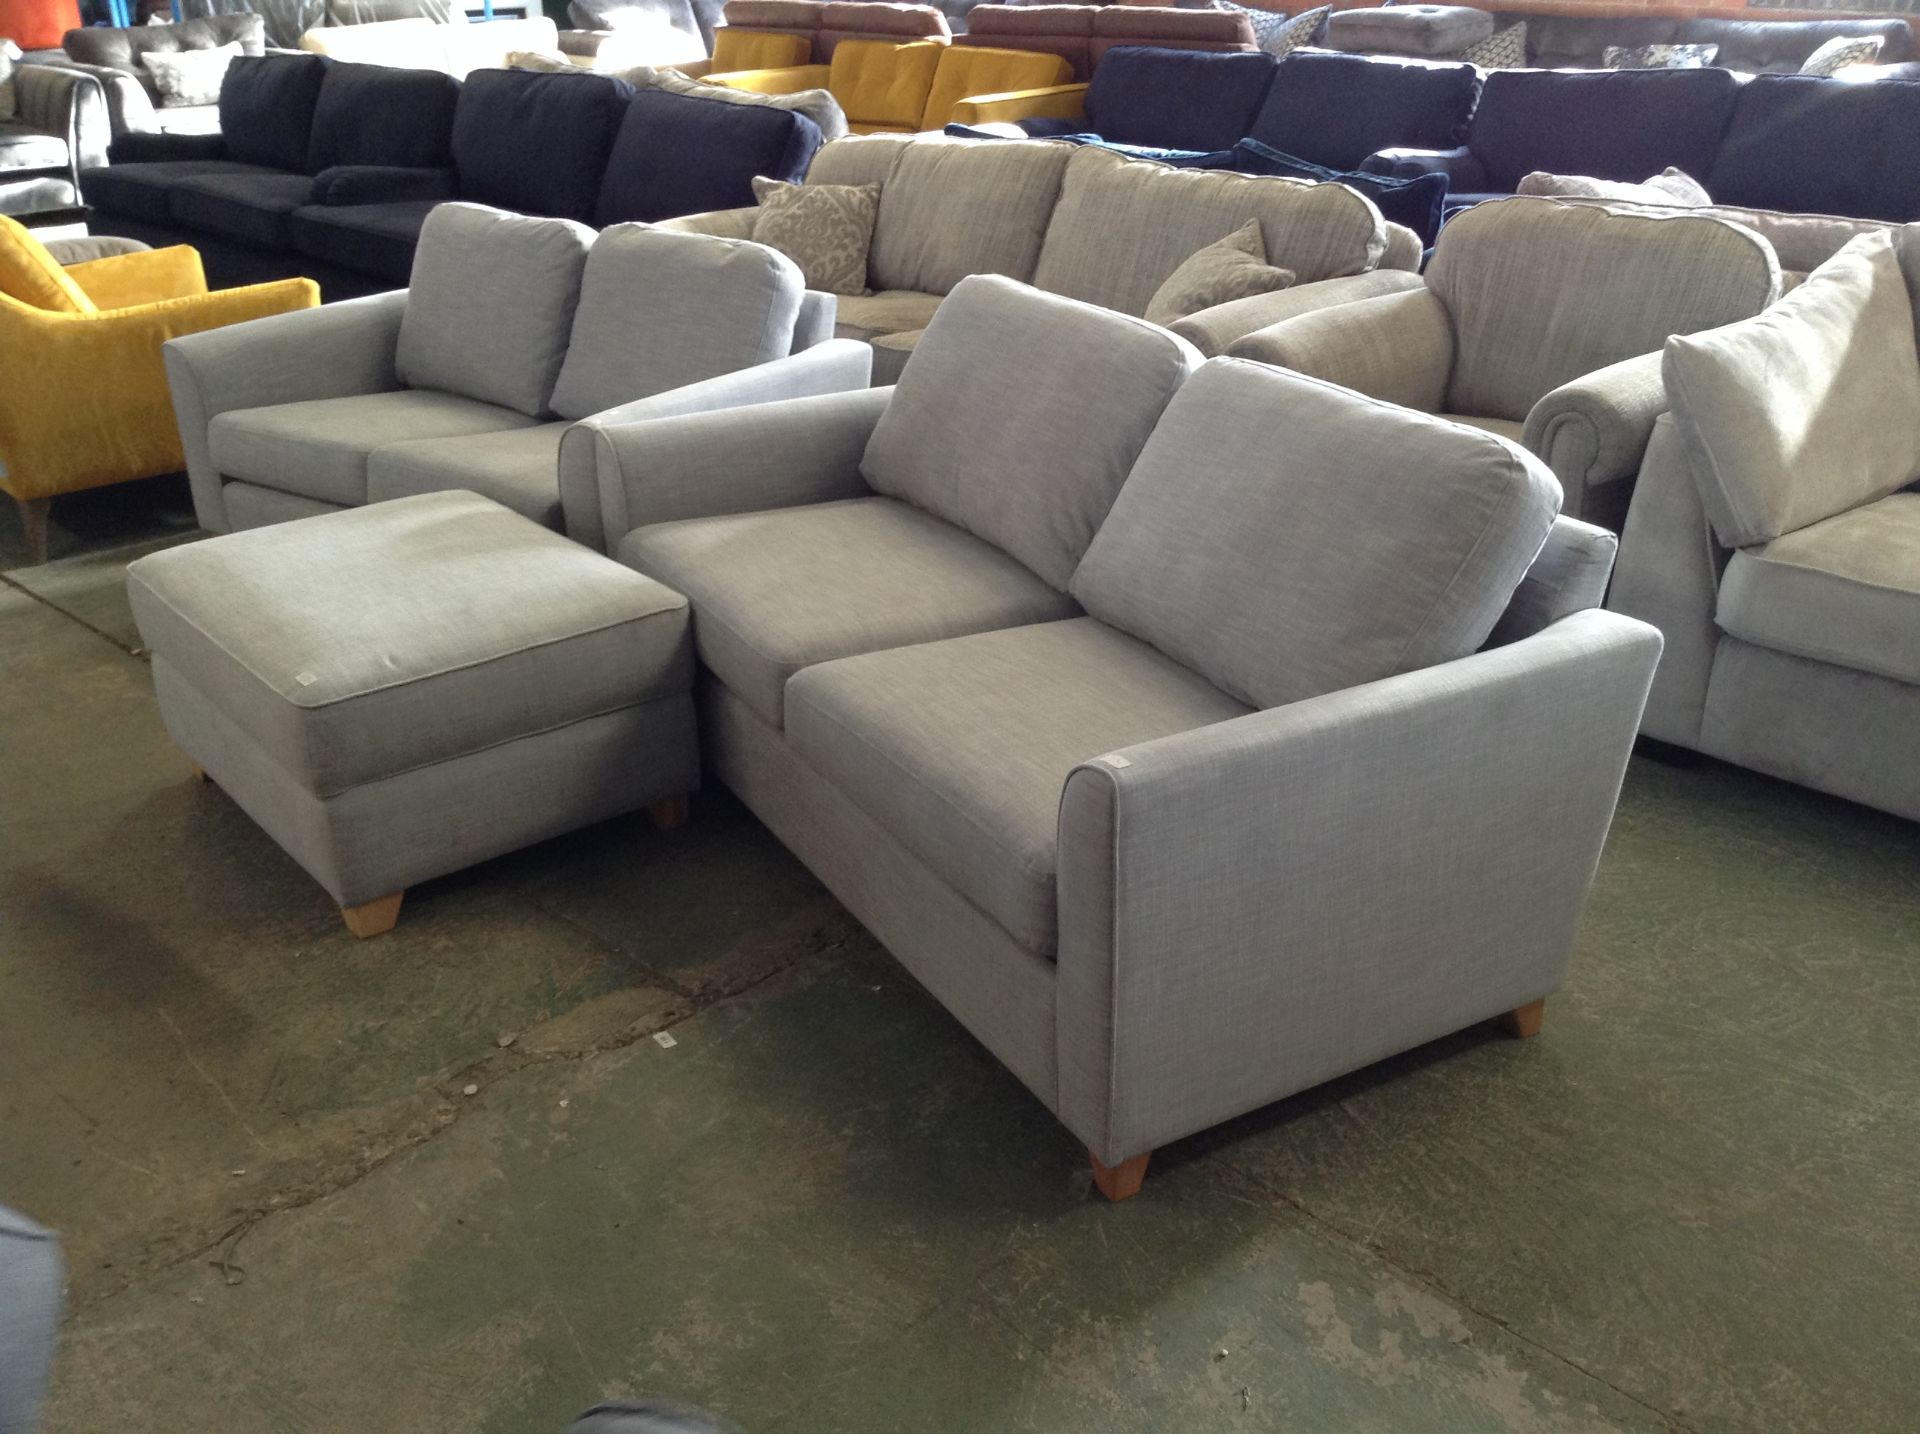 EX SHOWROOM SKY BLUE FABRIC 3 SEATER METAL ACTION